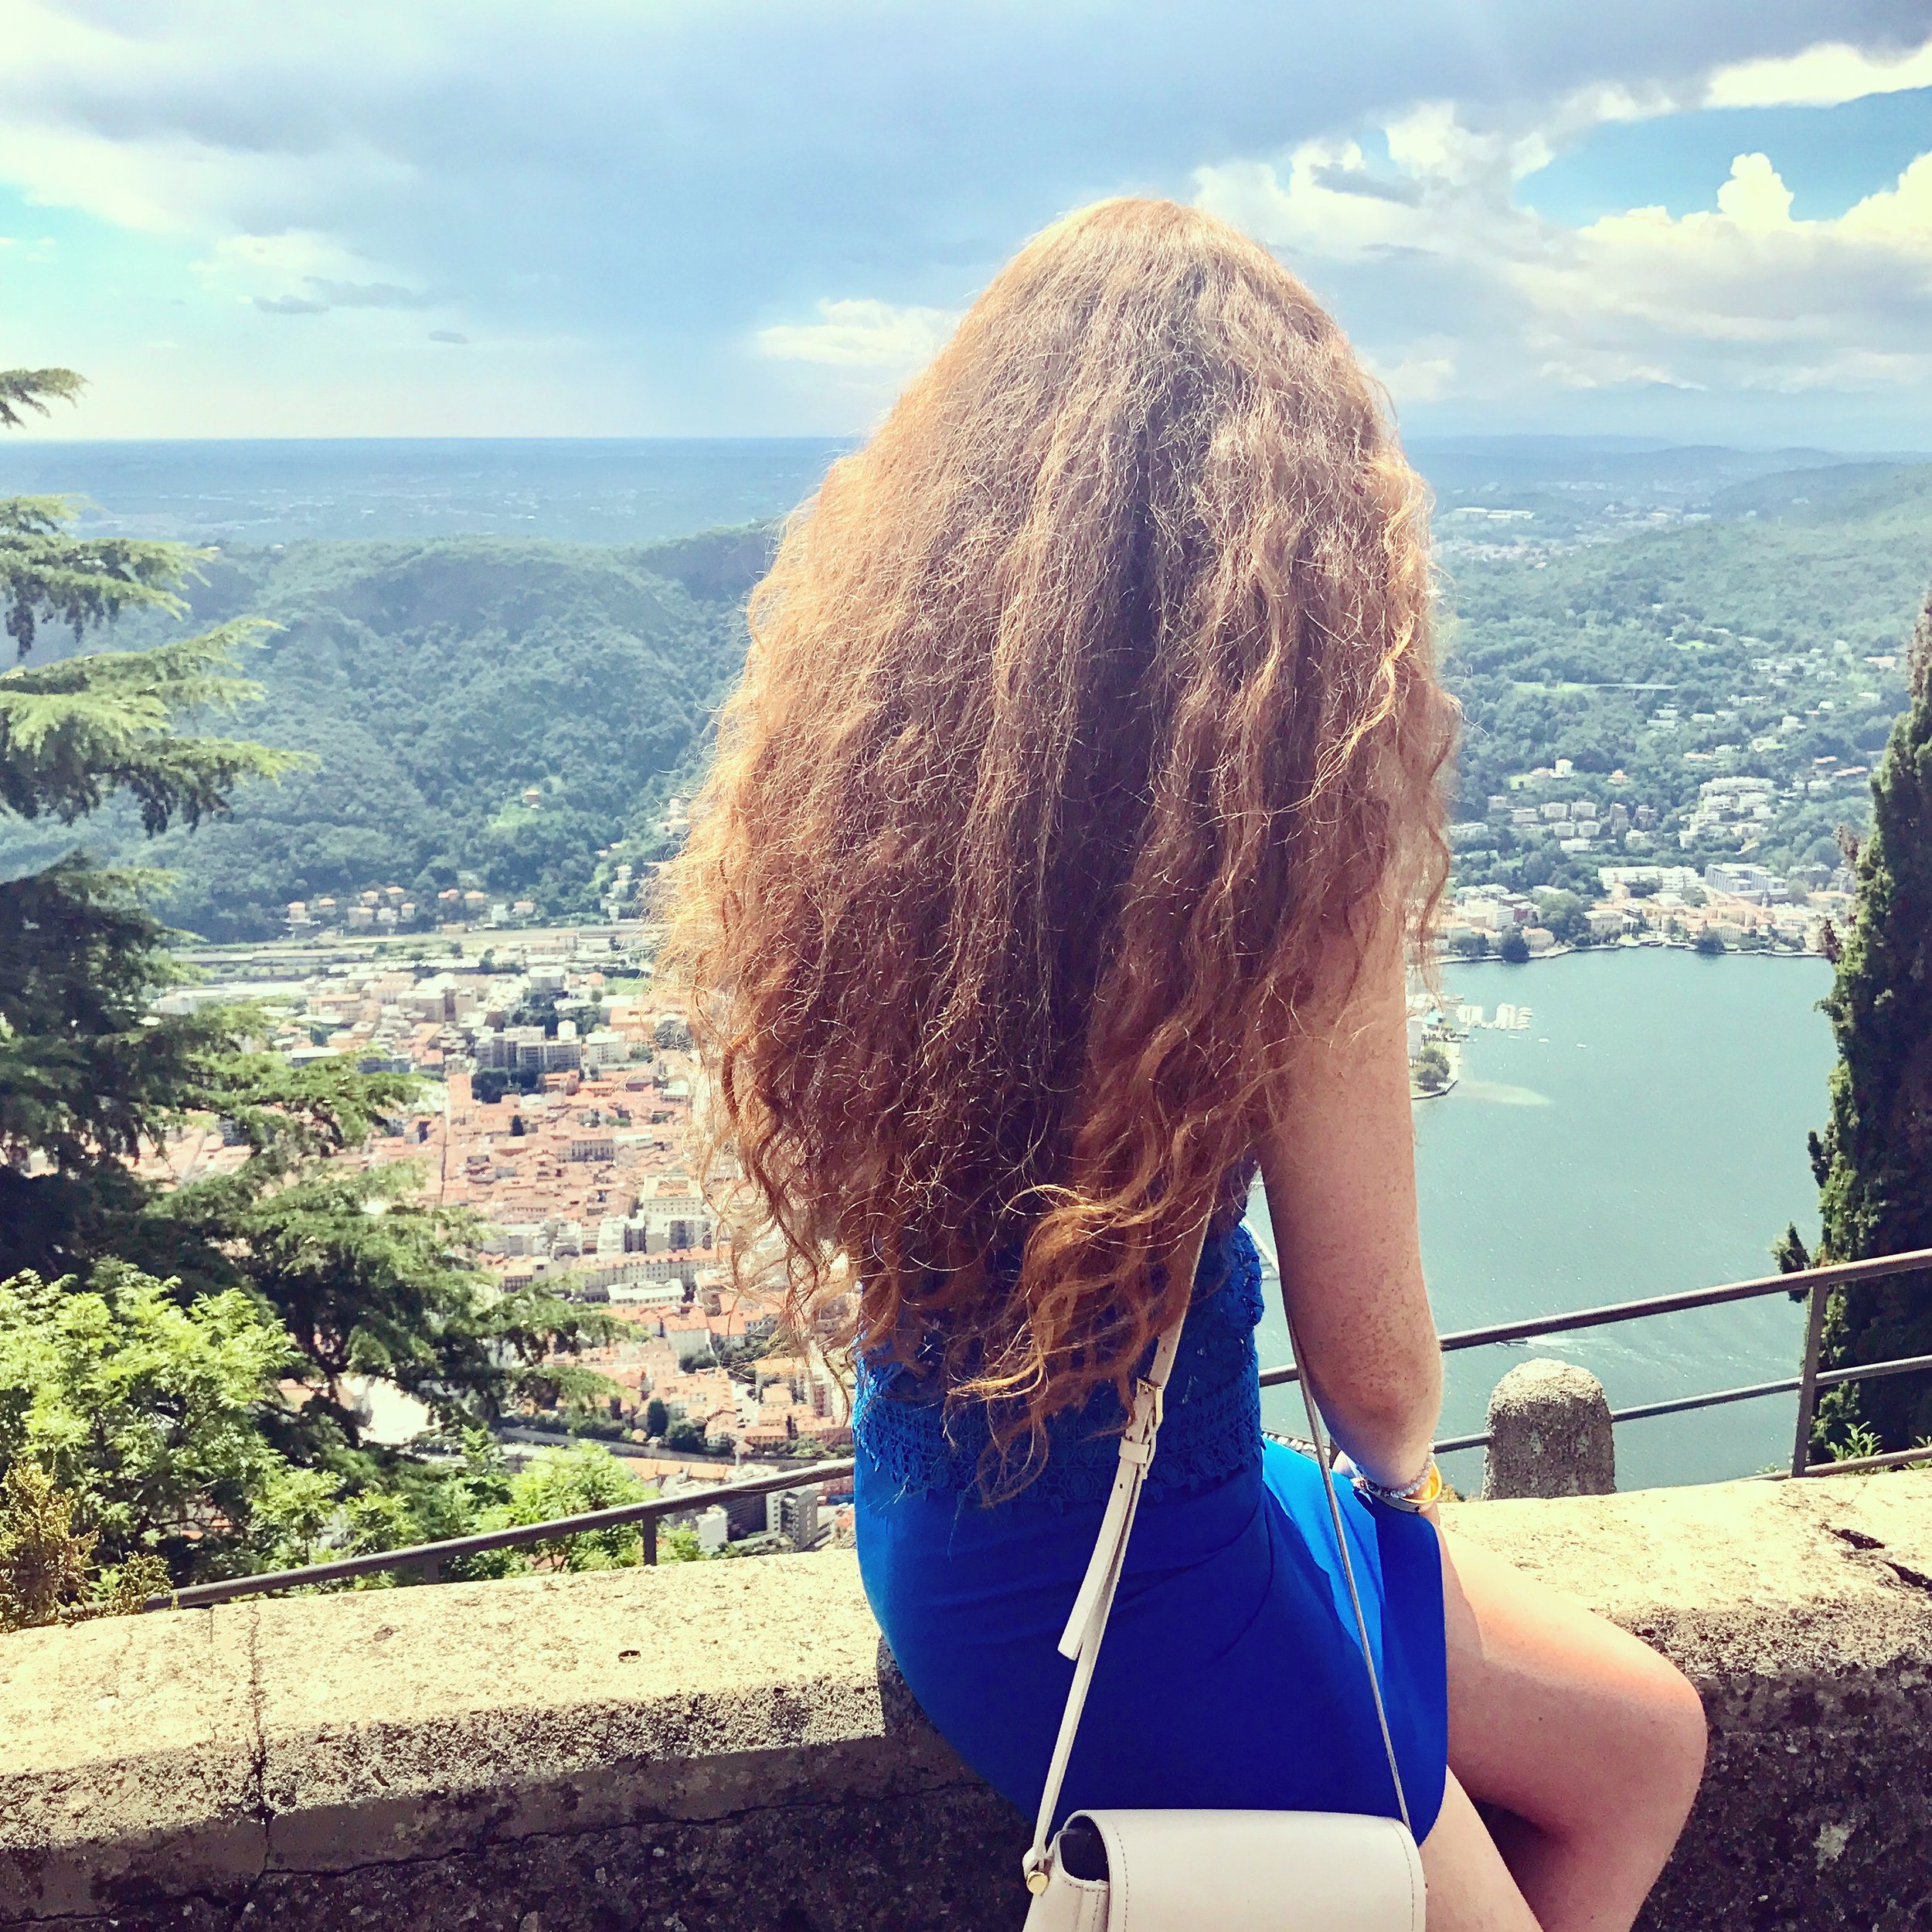 Lake Como Travel Guide: Views at the top of the cable cars in Como